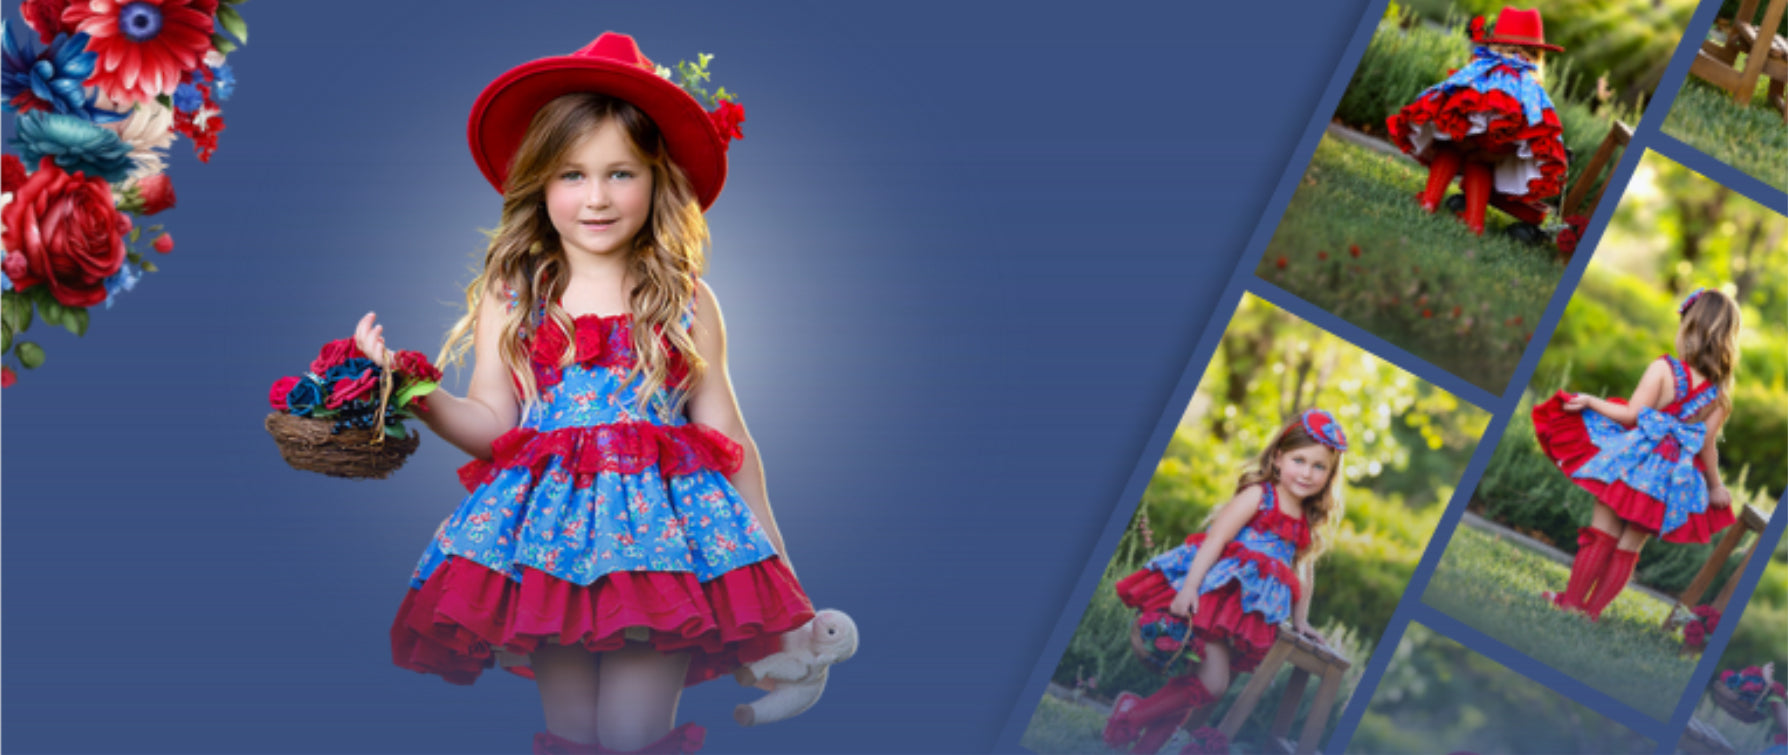 Red White & Cute!  July 4th Outfits for Little Girls